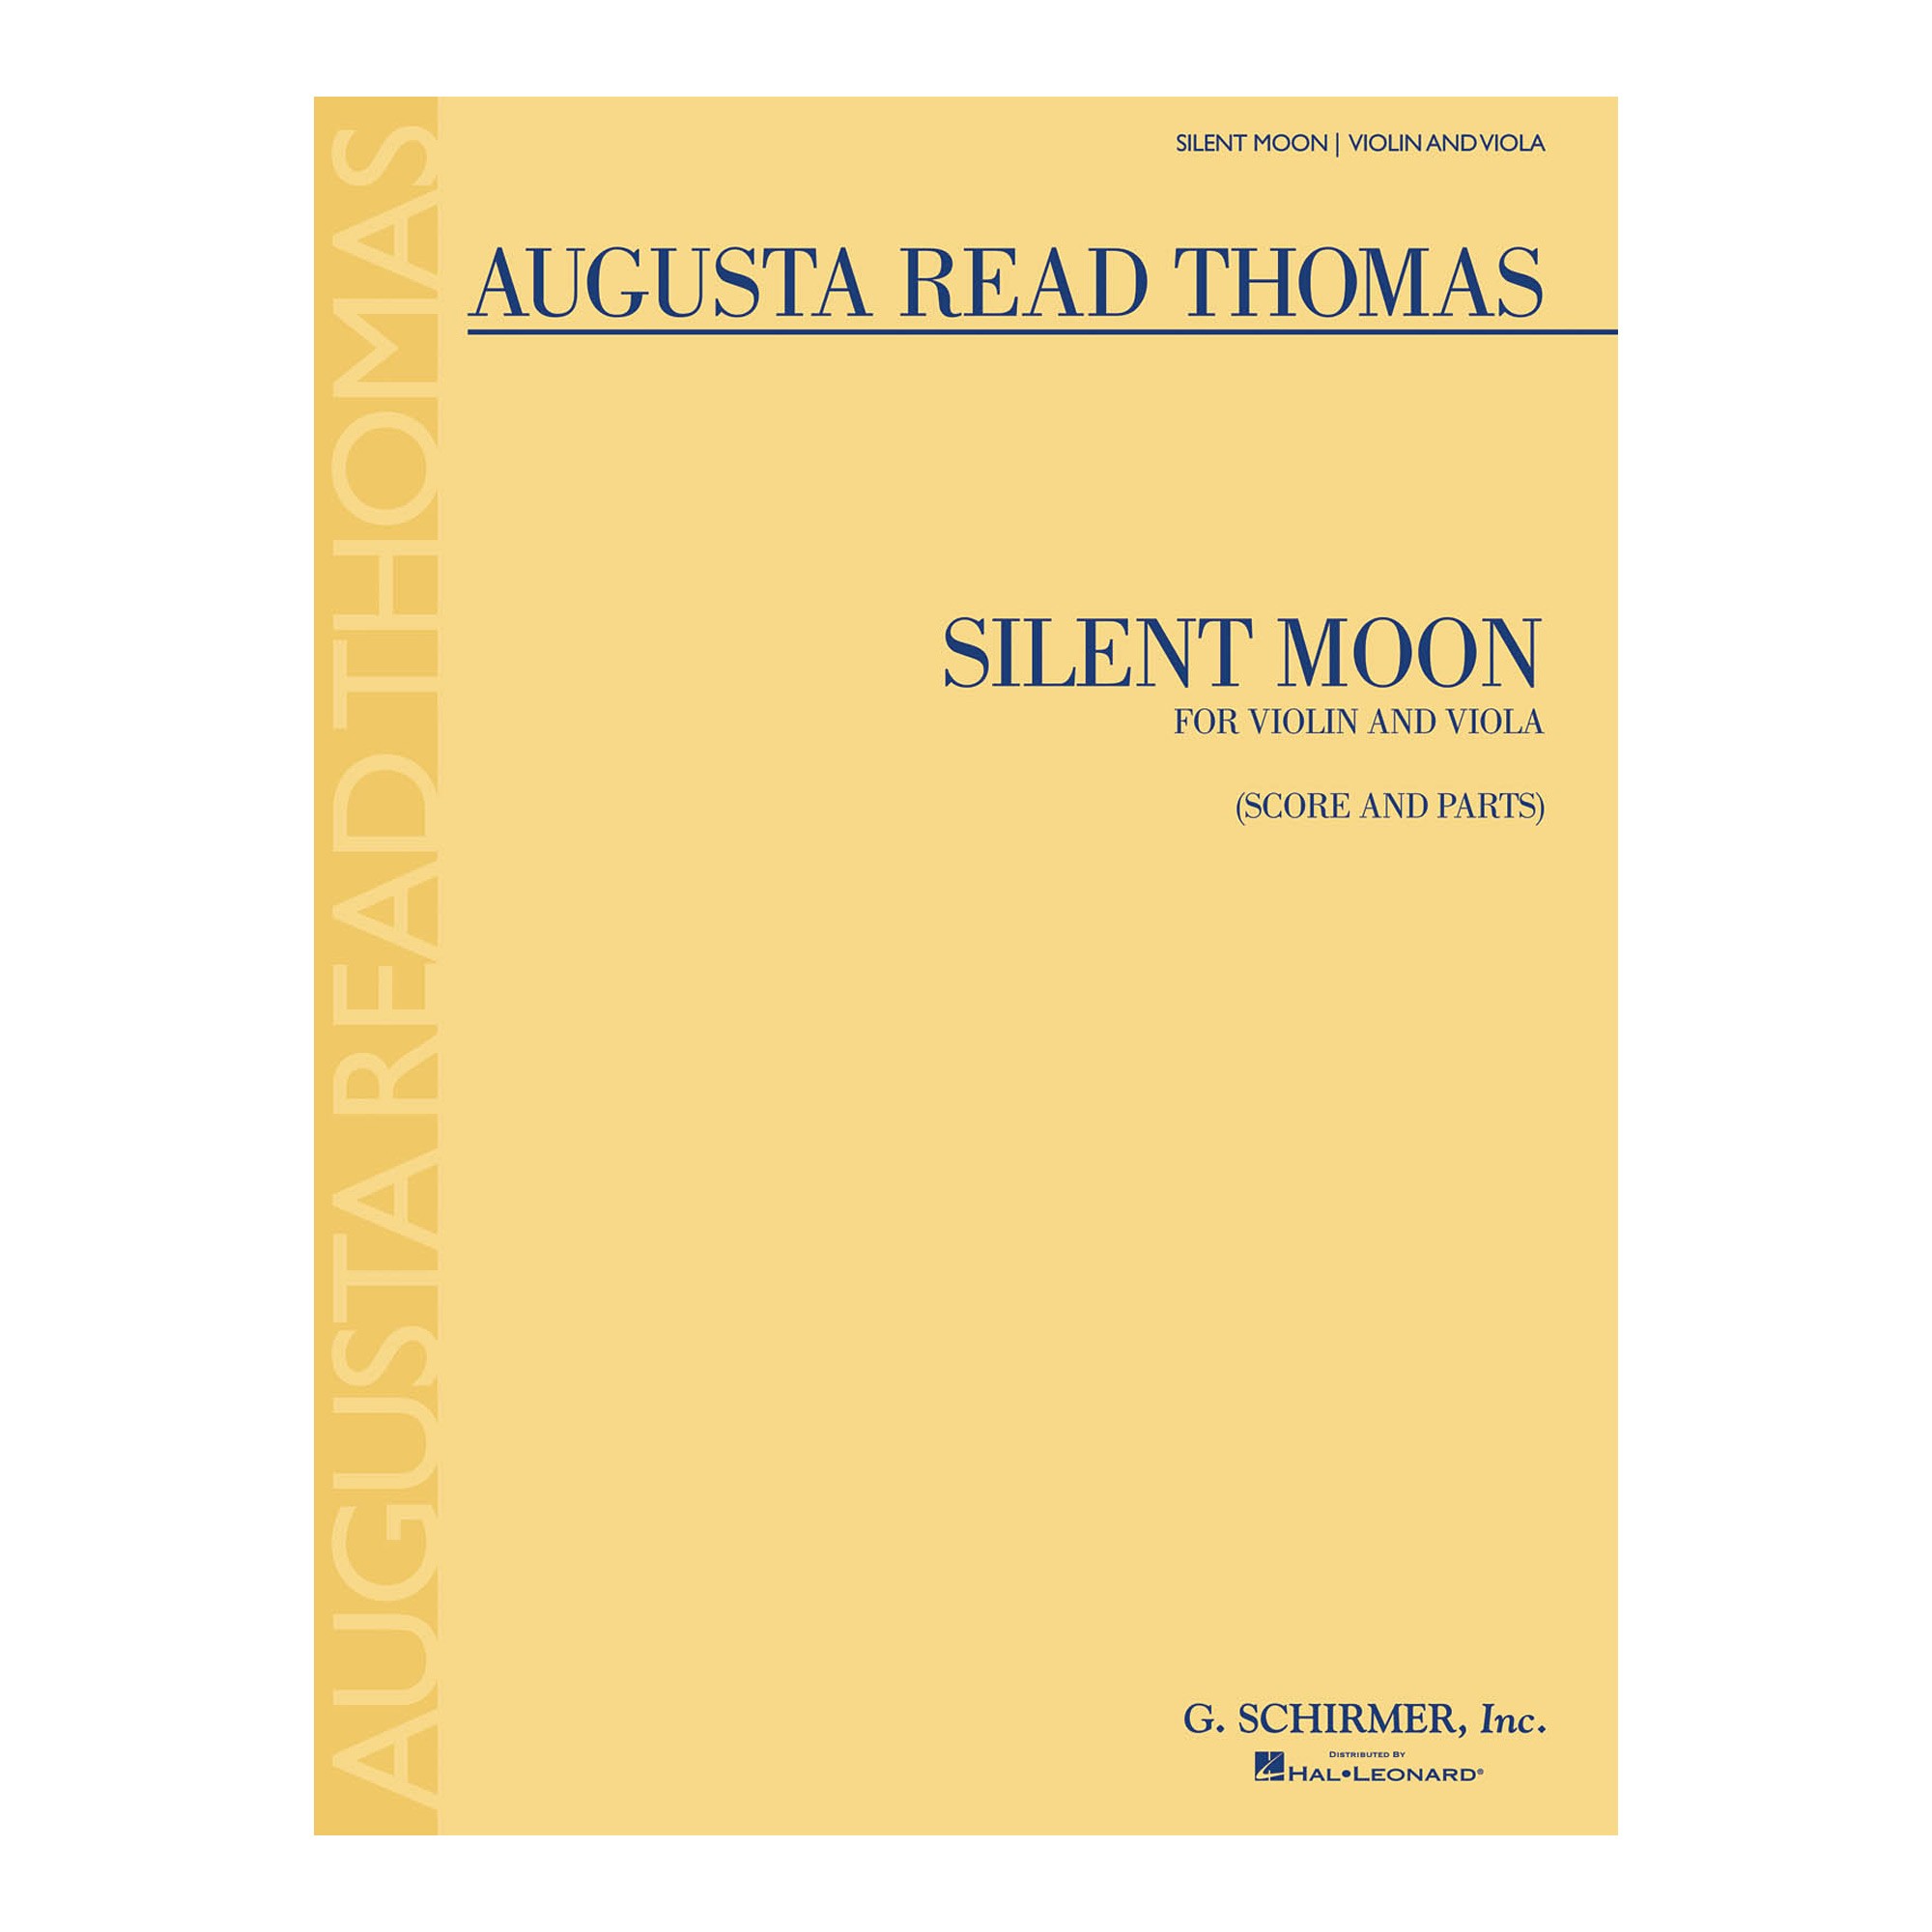 Silent Moon for Violin and Viola